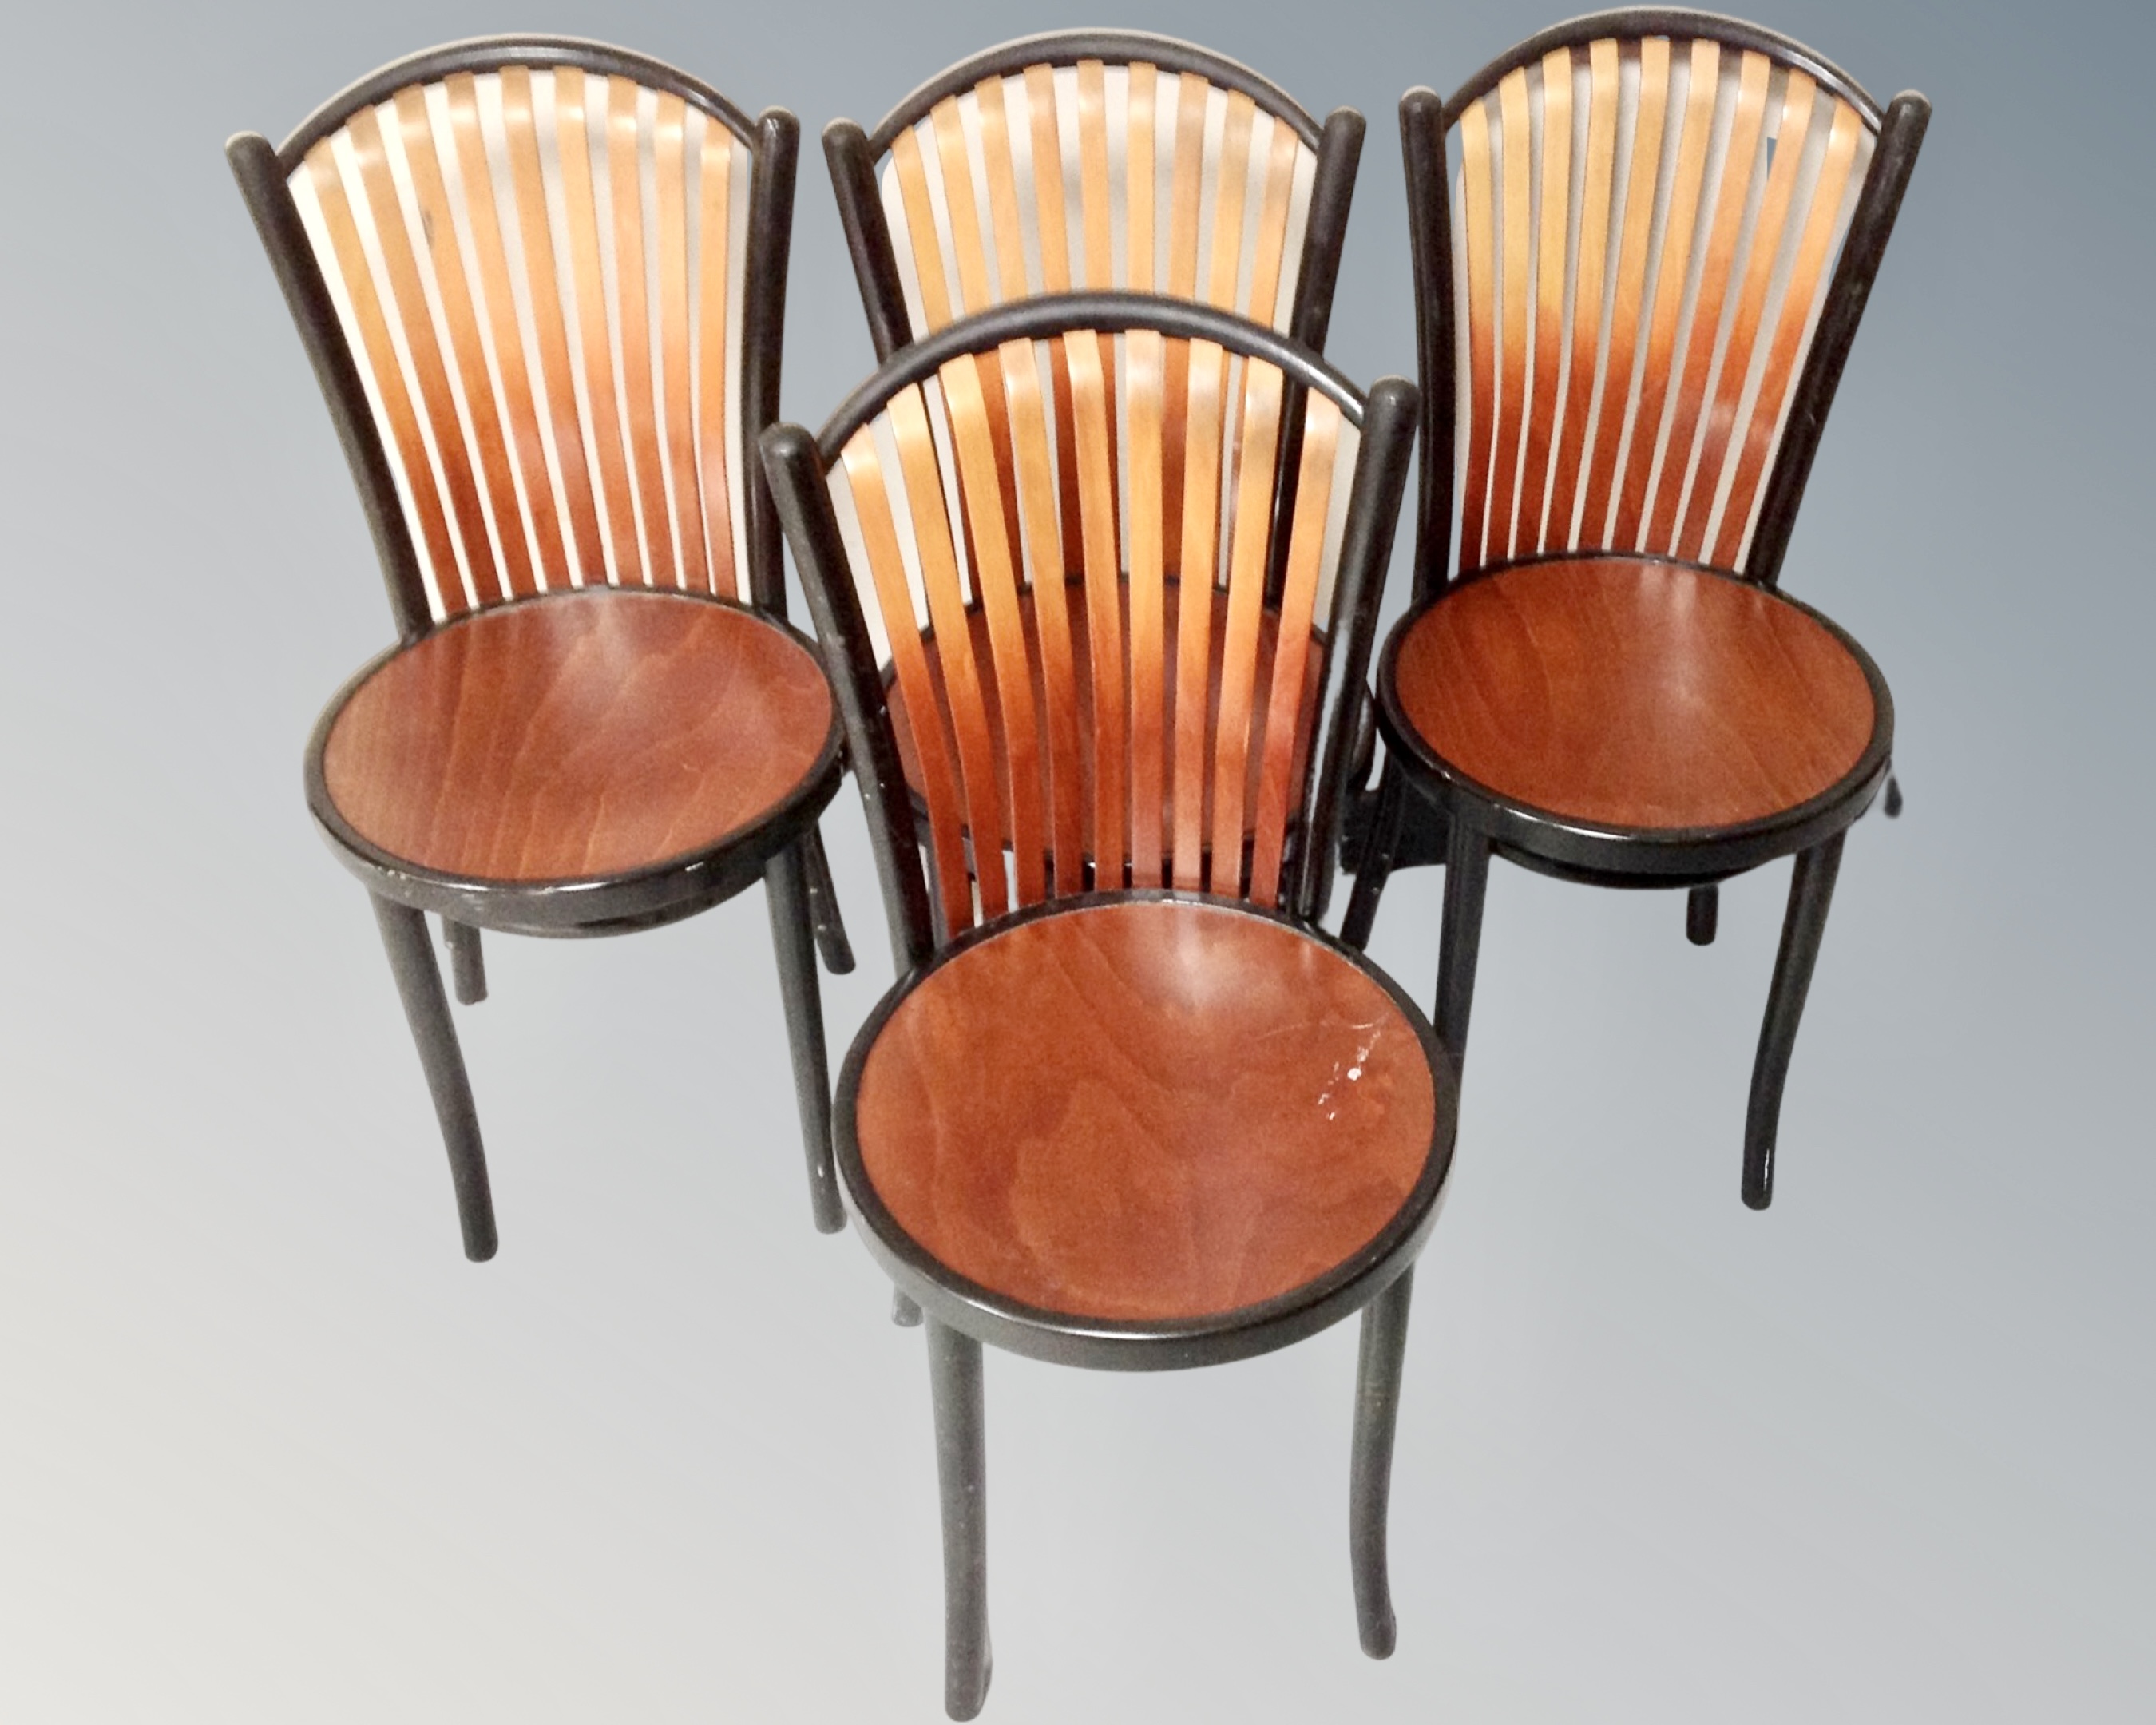 A set of four bentwood dining chairs.